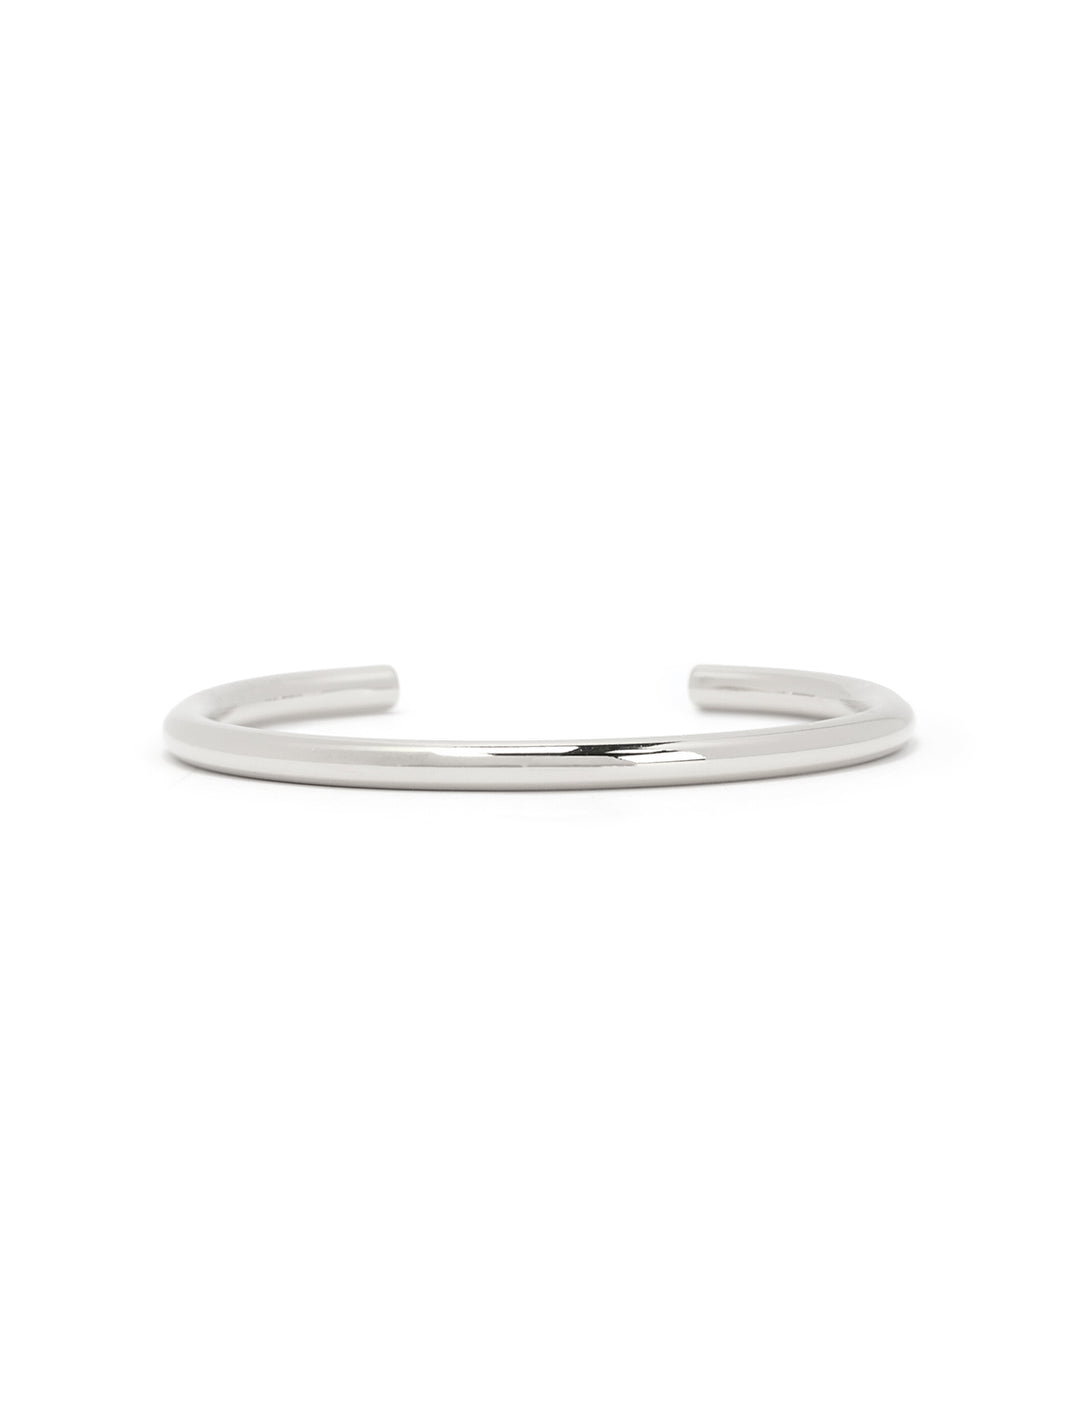 Front view of AV Max plain cuff in silver